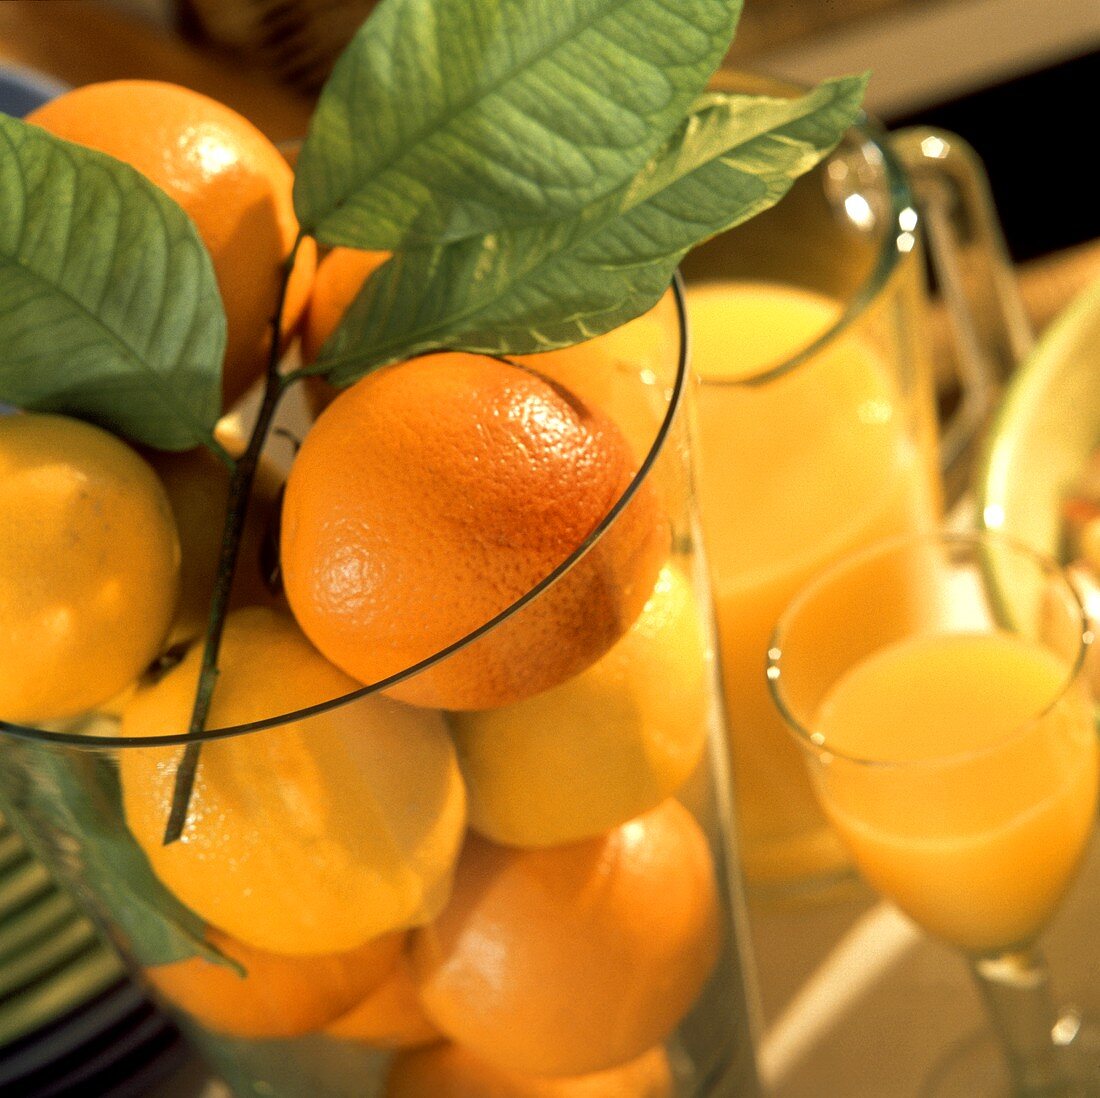 Lemons and oranges with leaves in glass; orange juice